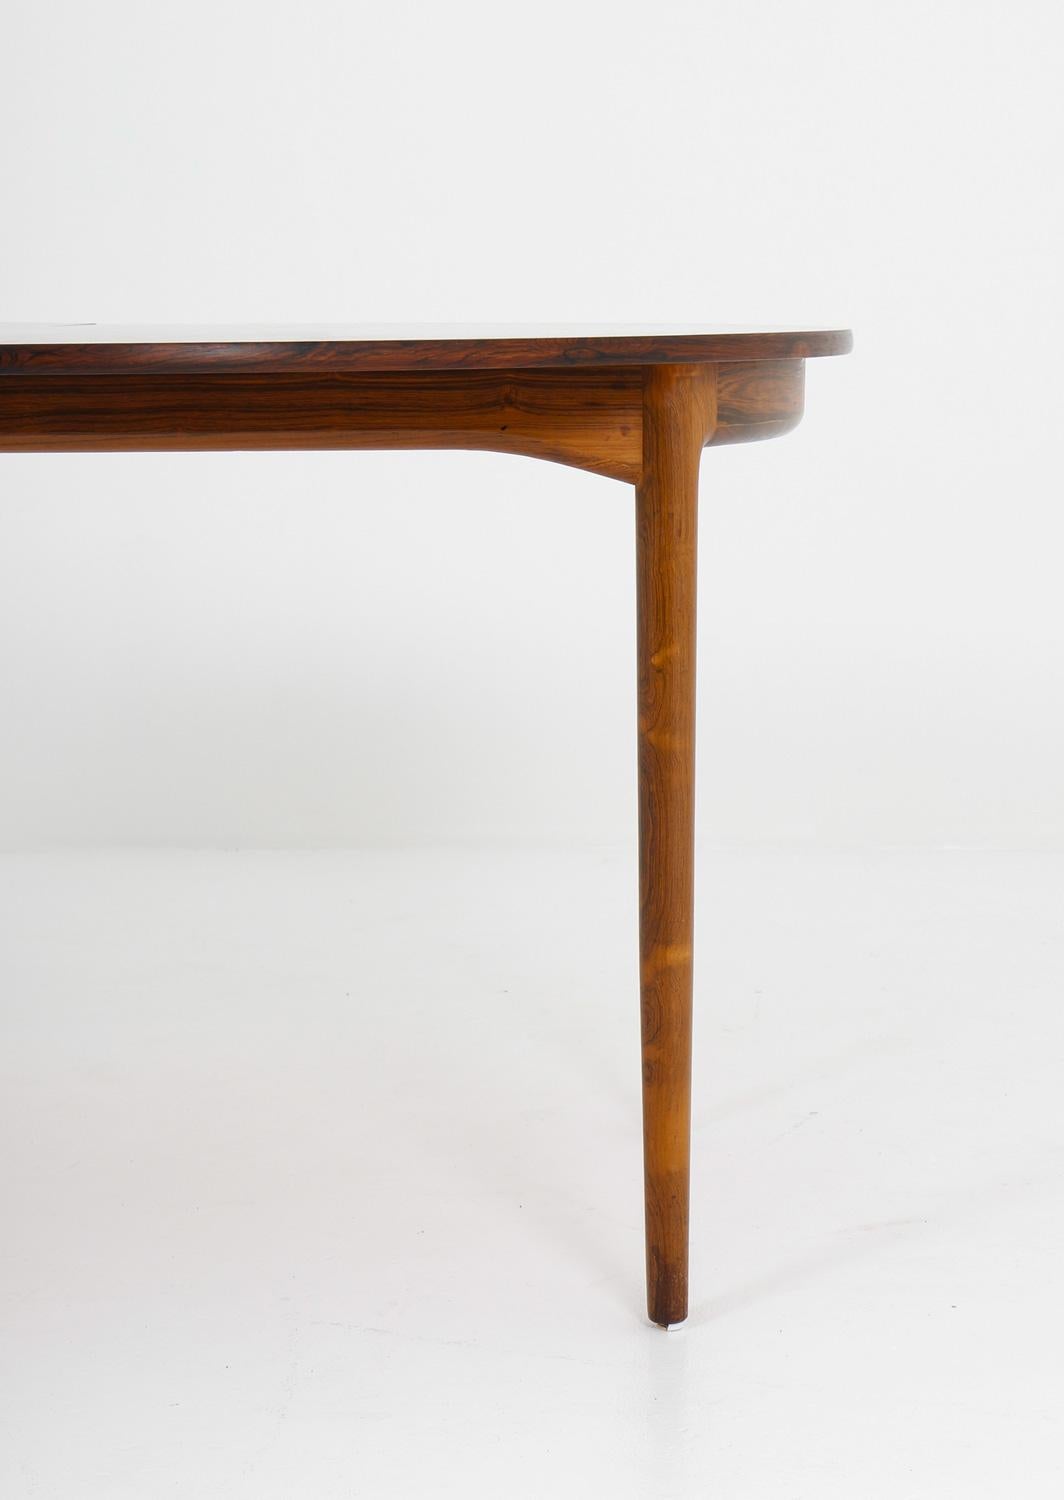 20th Century Scandinavian Mid Century Roswood Dining Table by Ib Kofod Larsen, 1960s For Sale